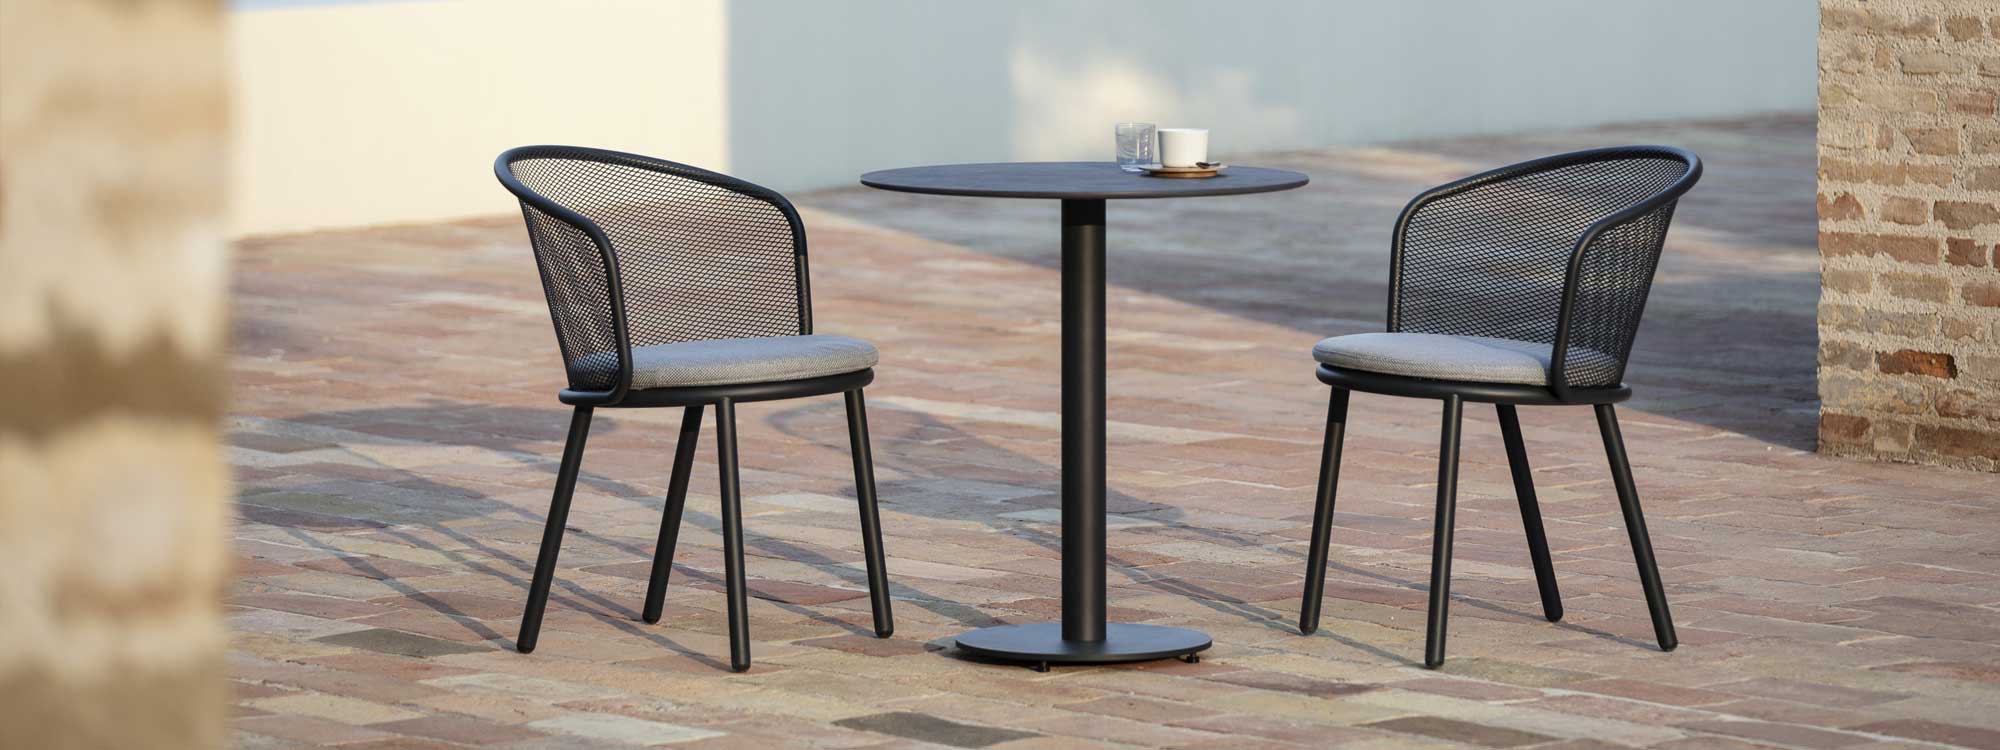 Image of anthracite Baza outdoor chair and Branta bistro table in courtyard